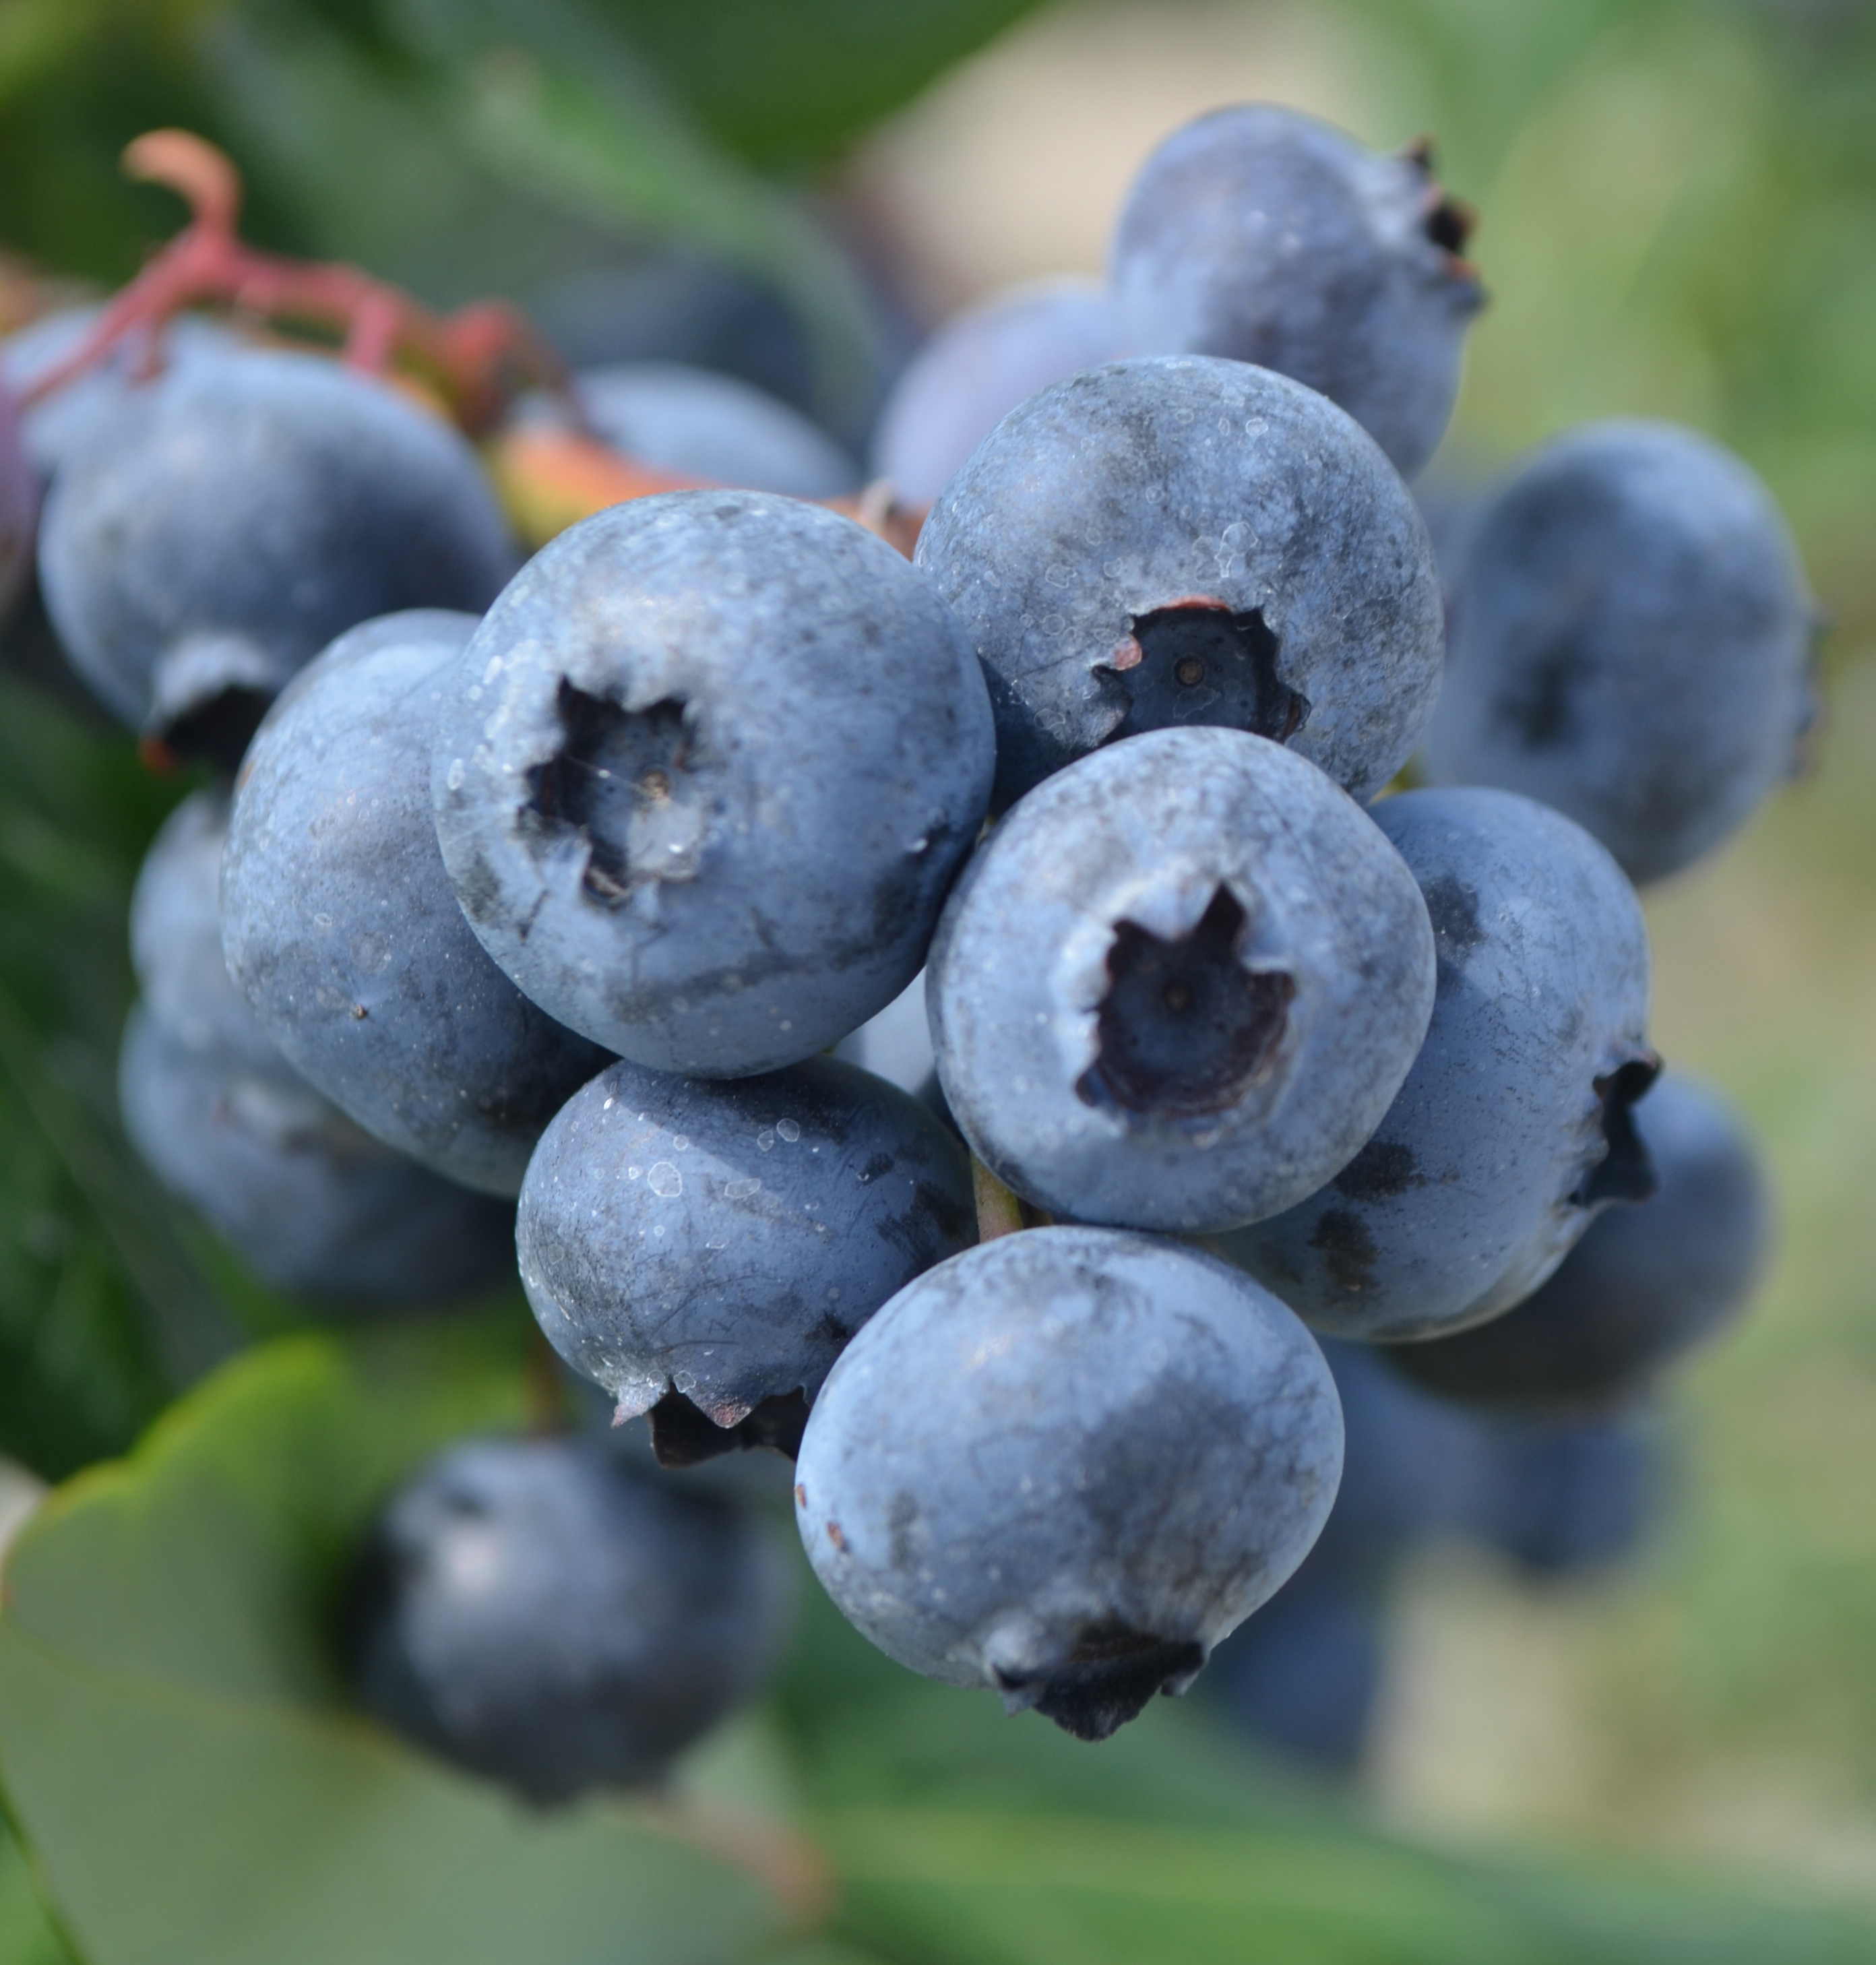 New Jersey Blueberry Industry Responds To Food Safety Claims Fruit Growers News